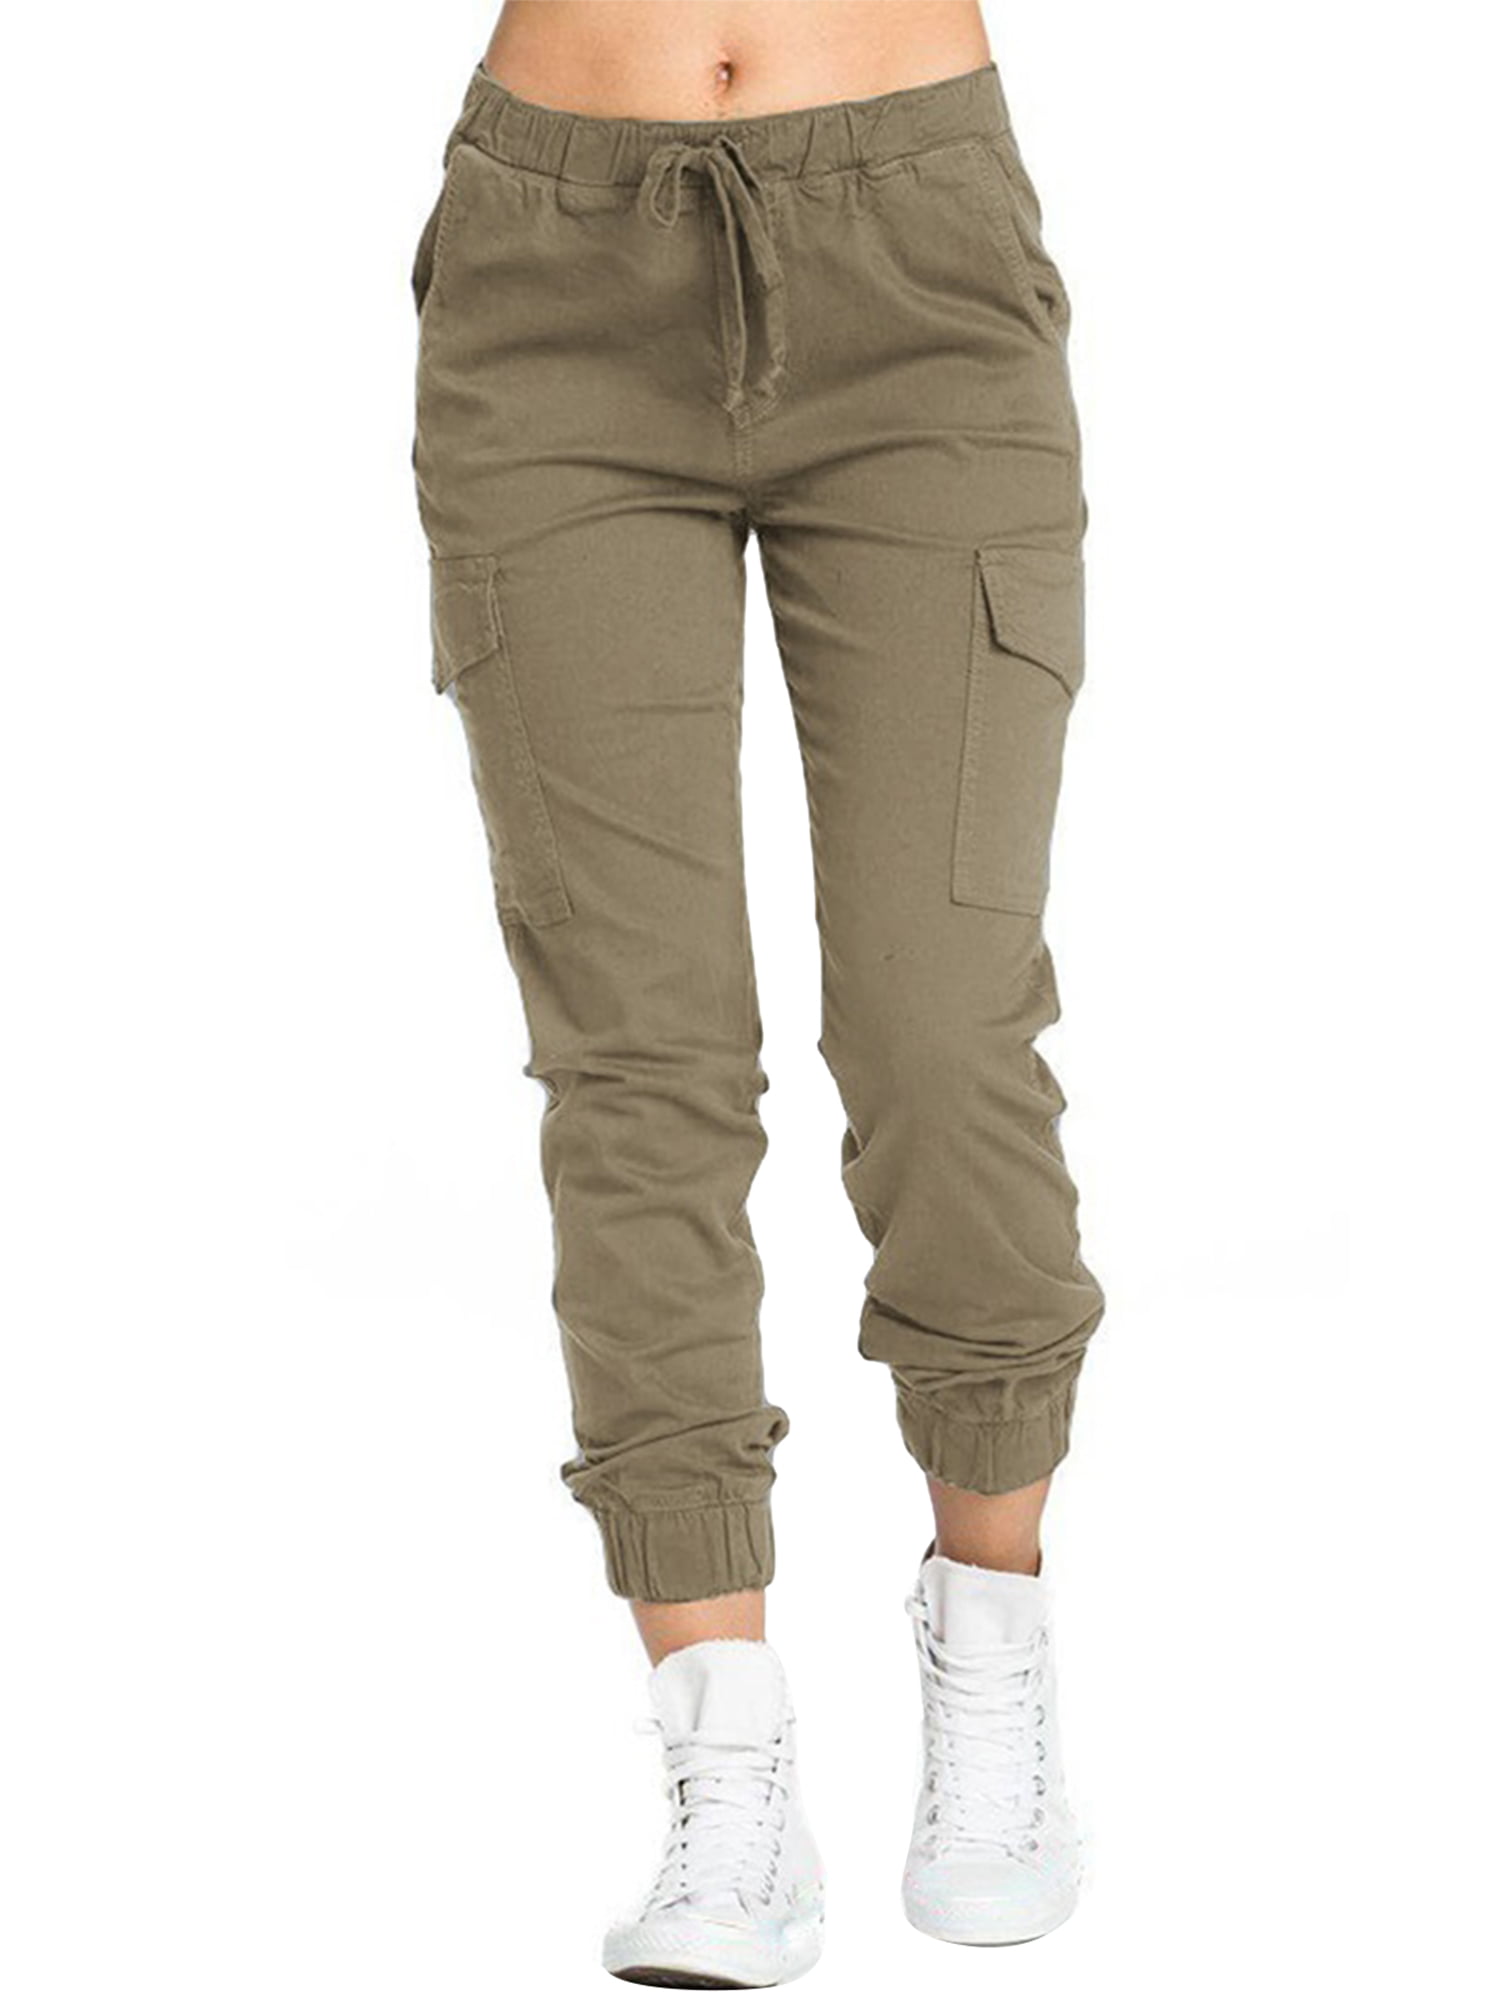 Casual Solid Elastic High Waisted Baggy Jogger Workout Pants with Pockets Toimothcn Womens Cargo Pants 